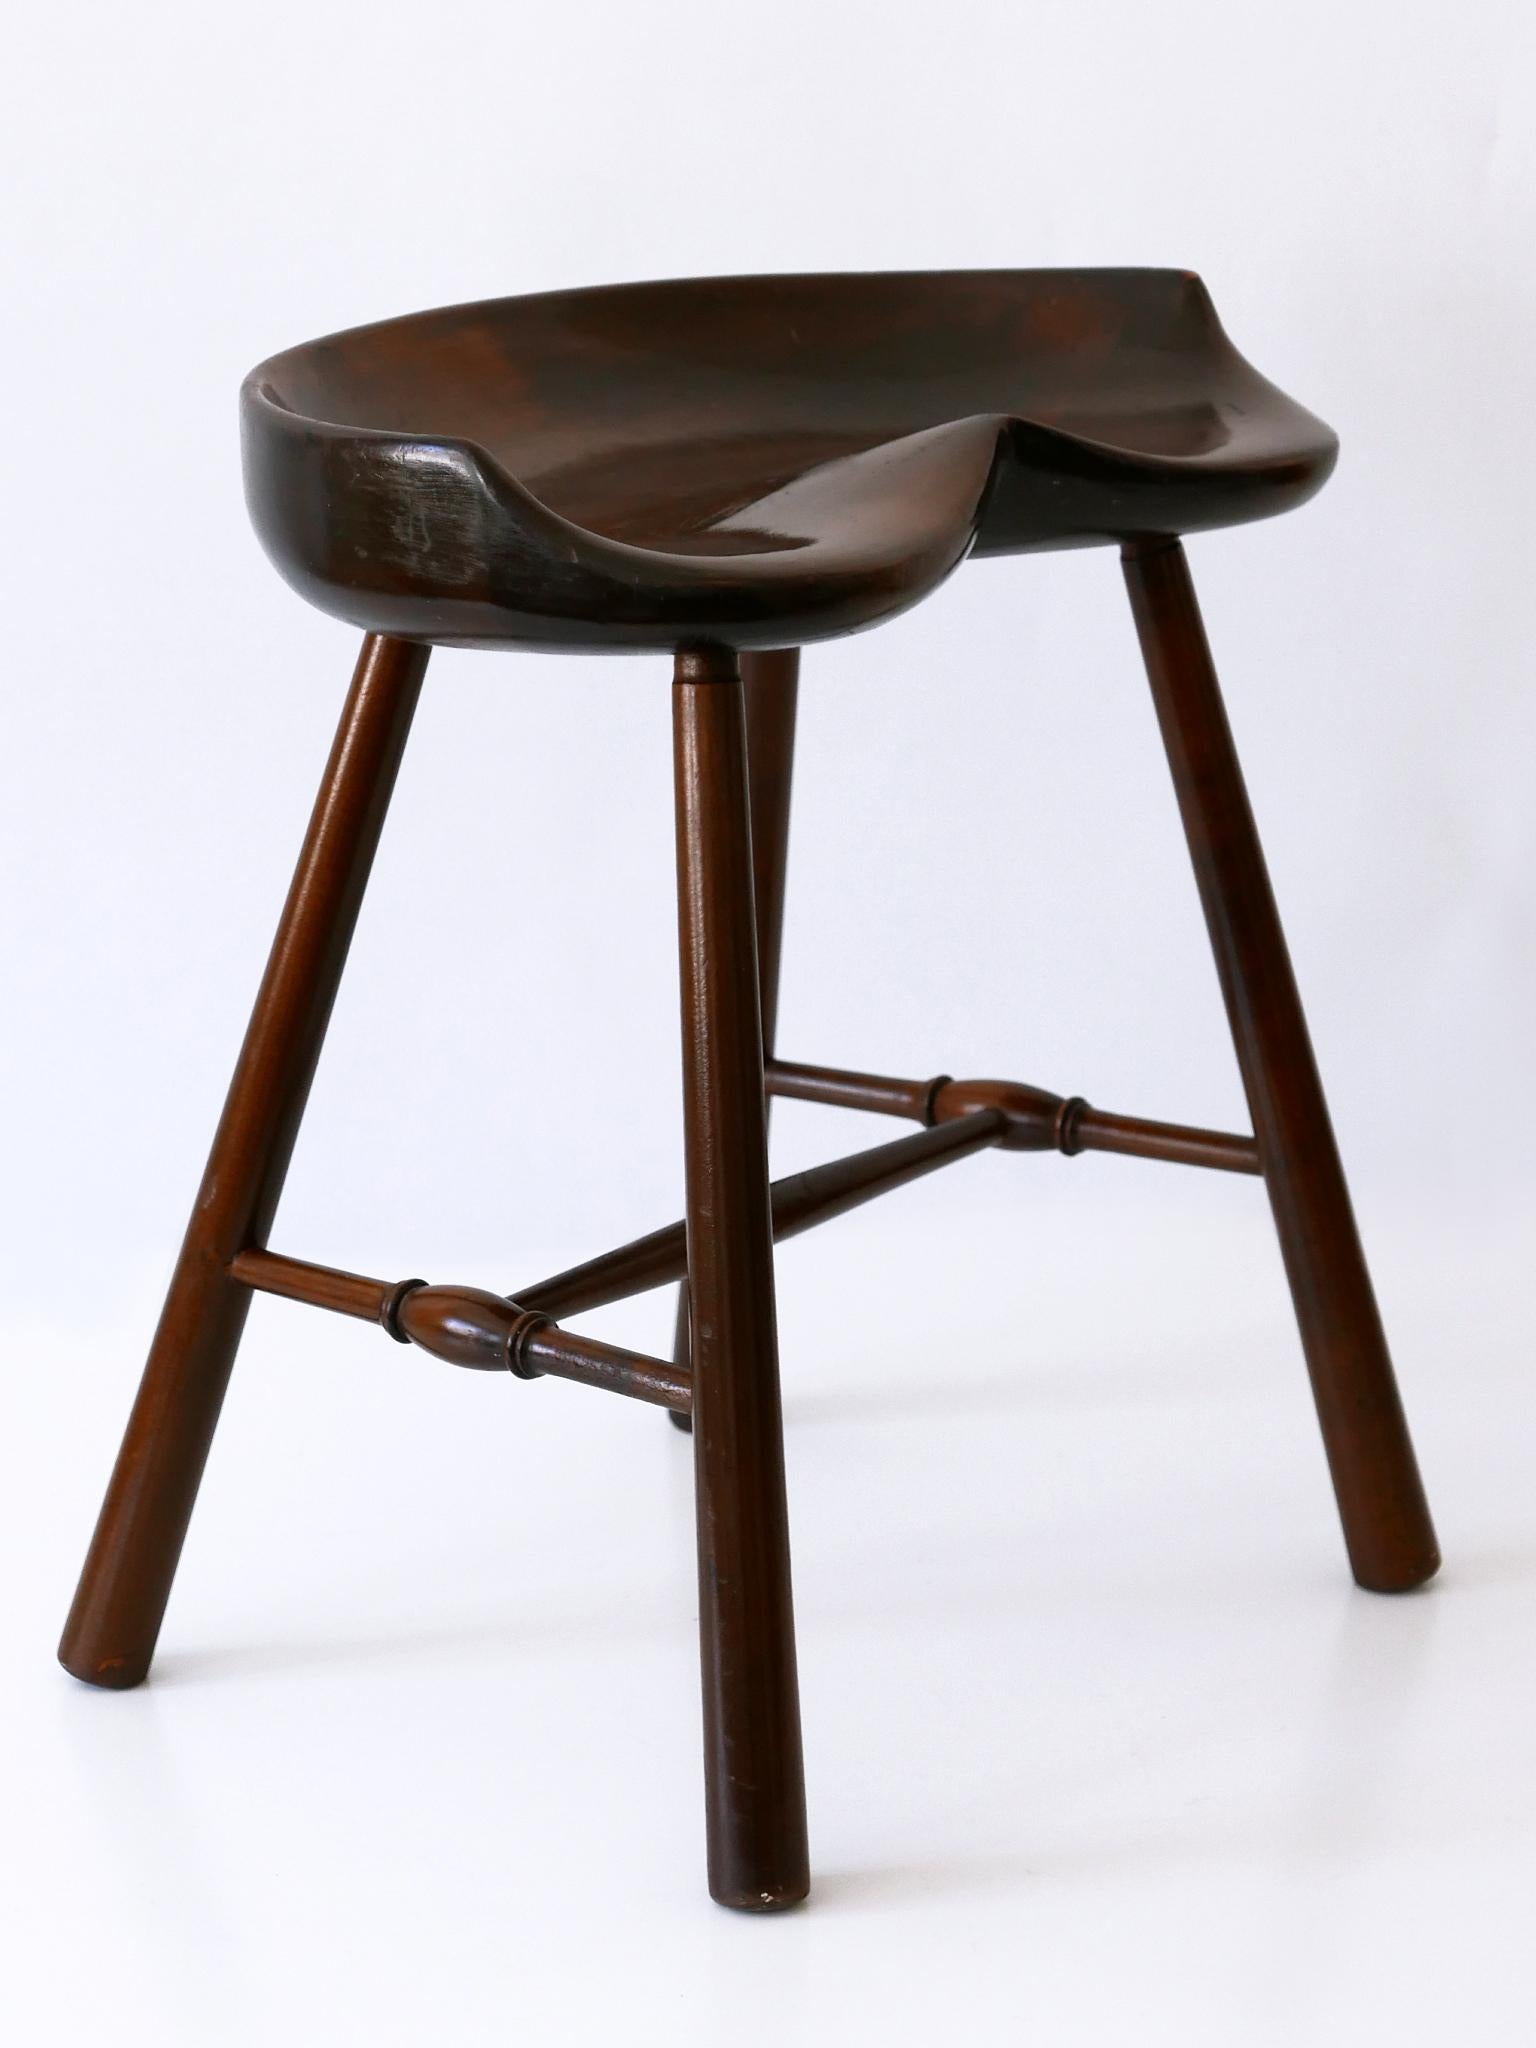 Sculptural Mid-Century Modern Solid Wood Stool Germany 1950s For Sale 2